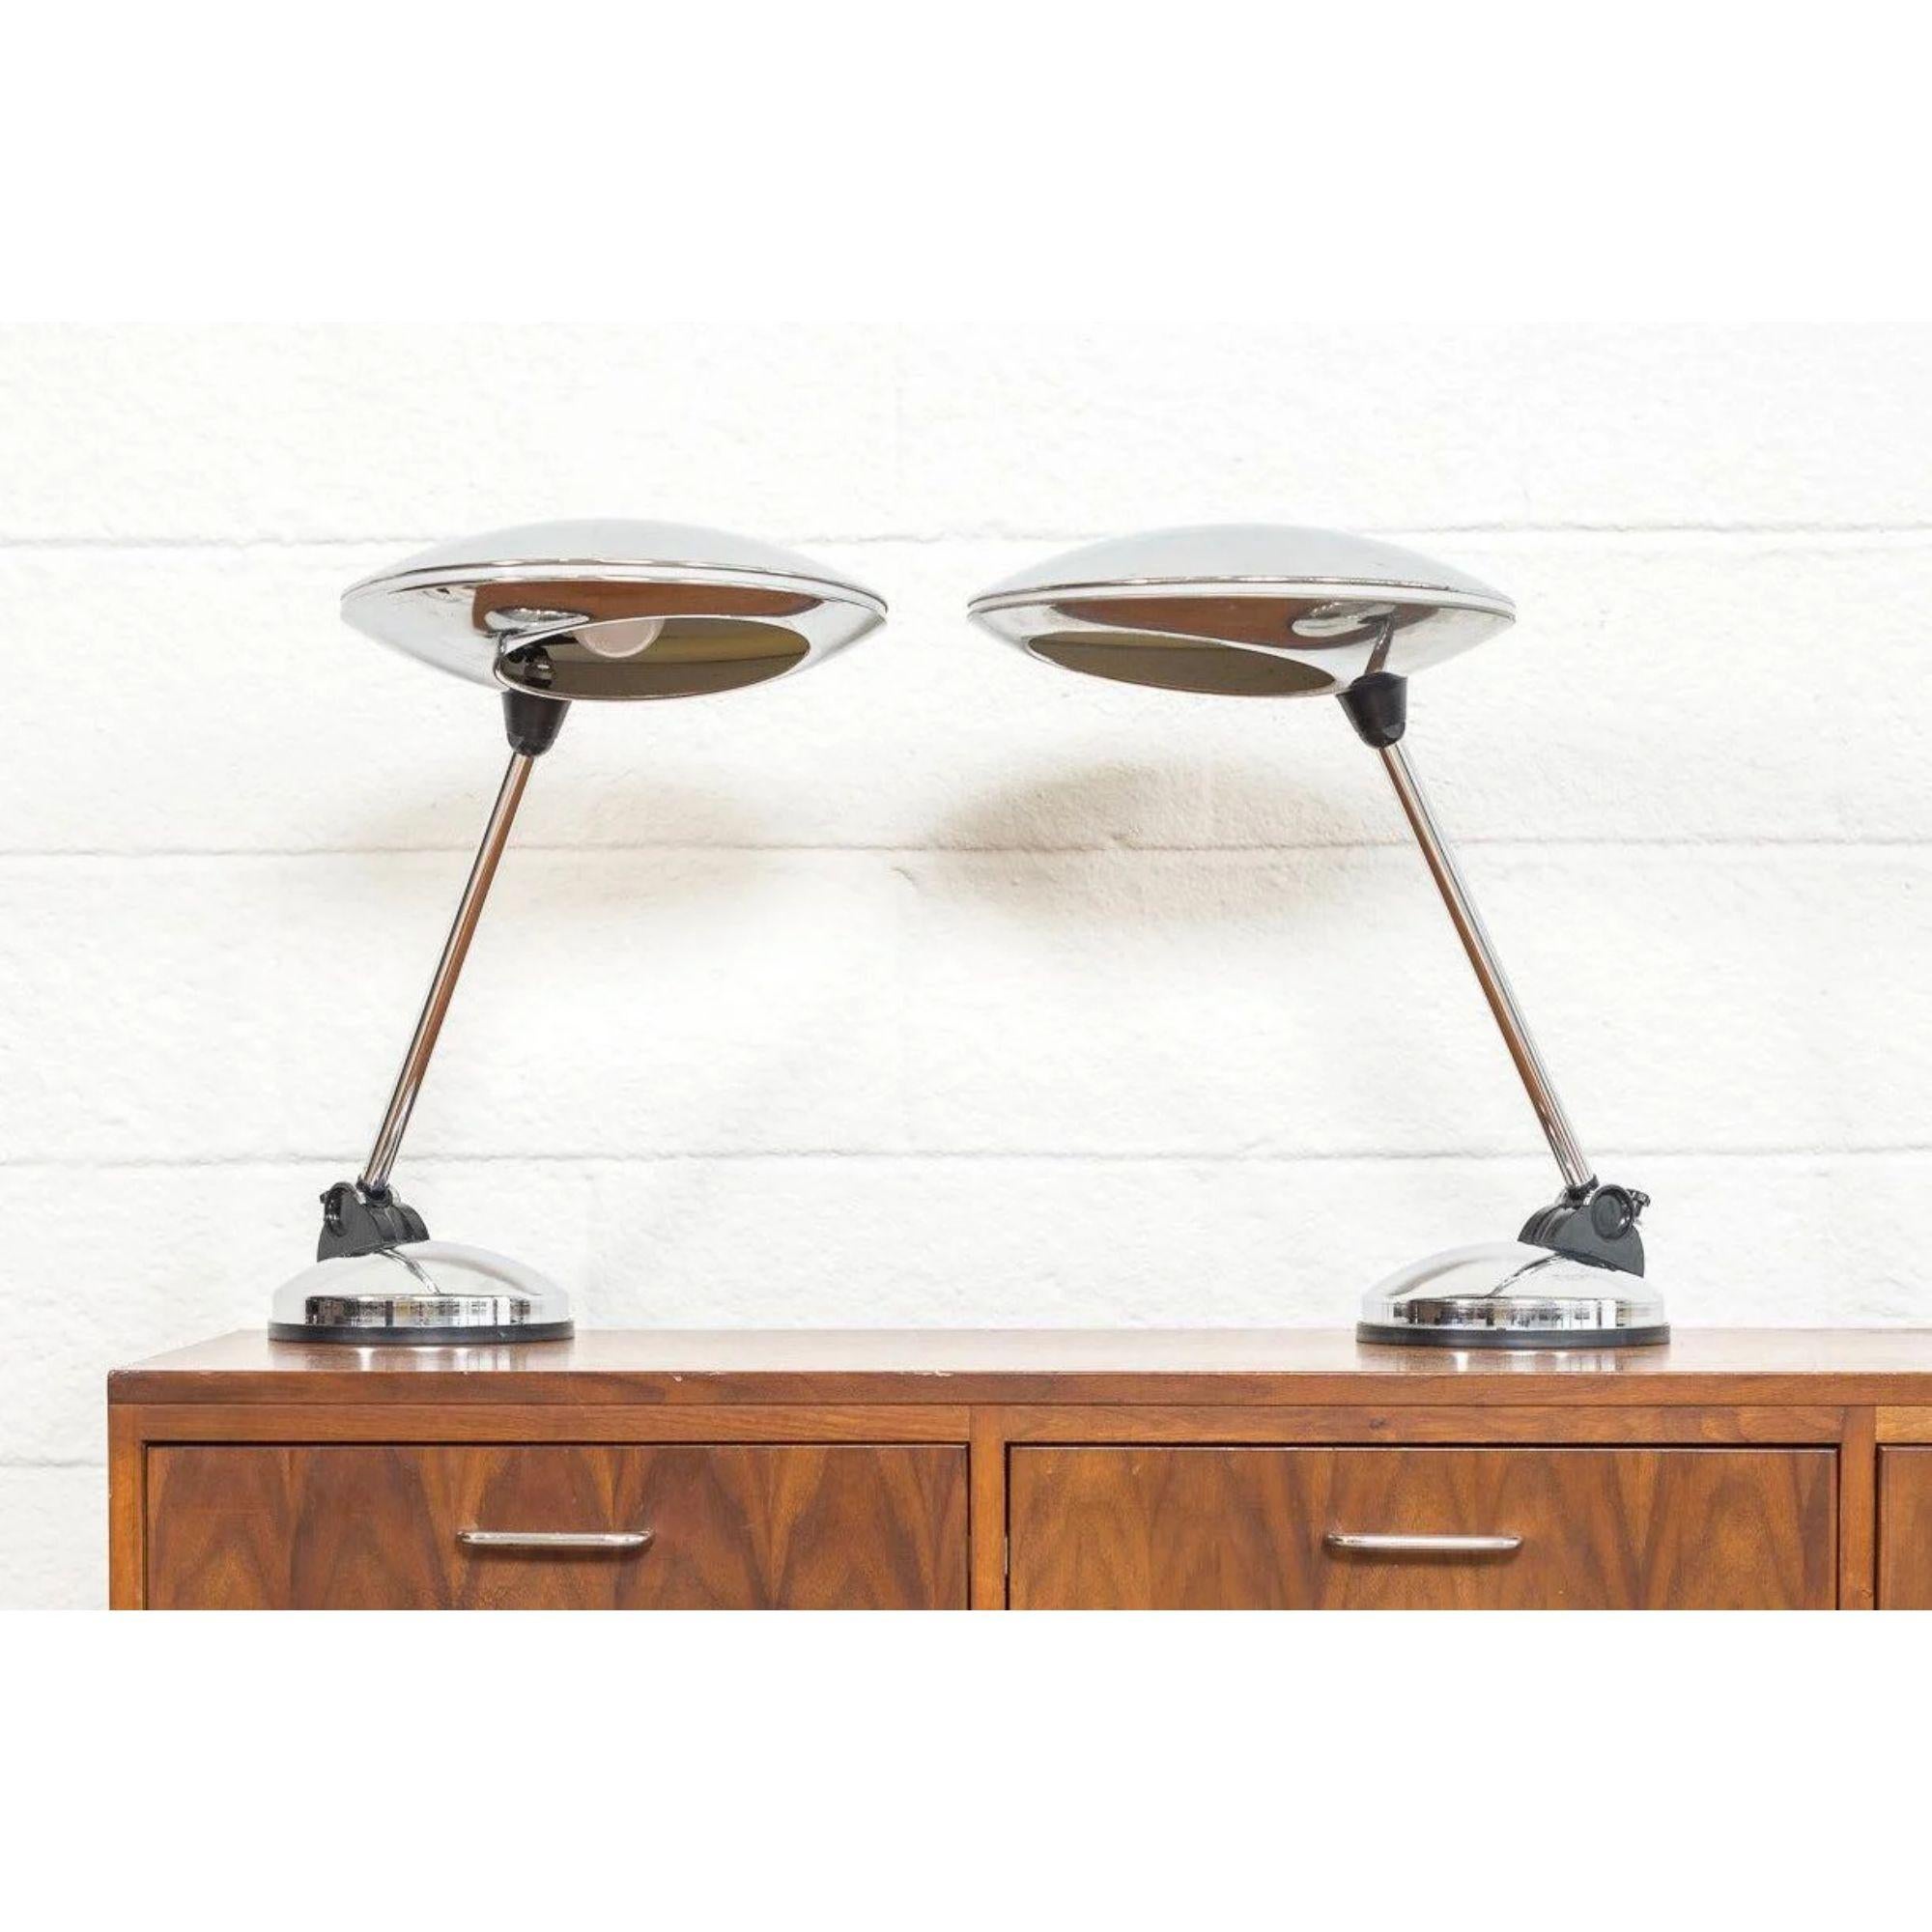 This pair of vintage Mid-Century Modern articulating table desk lamps were made in Italy, circa 1960. The unique, modernist design features distinctive saucer-shaped polished chrome shades with a translucent stripe in center which illuminates when